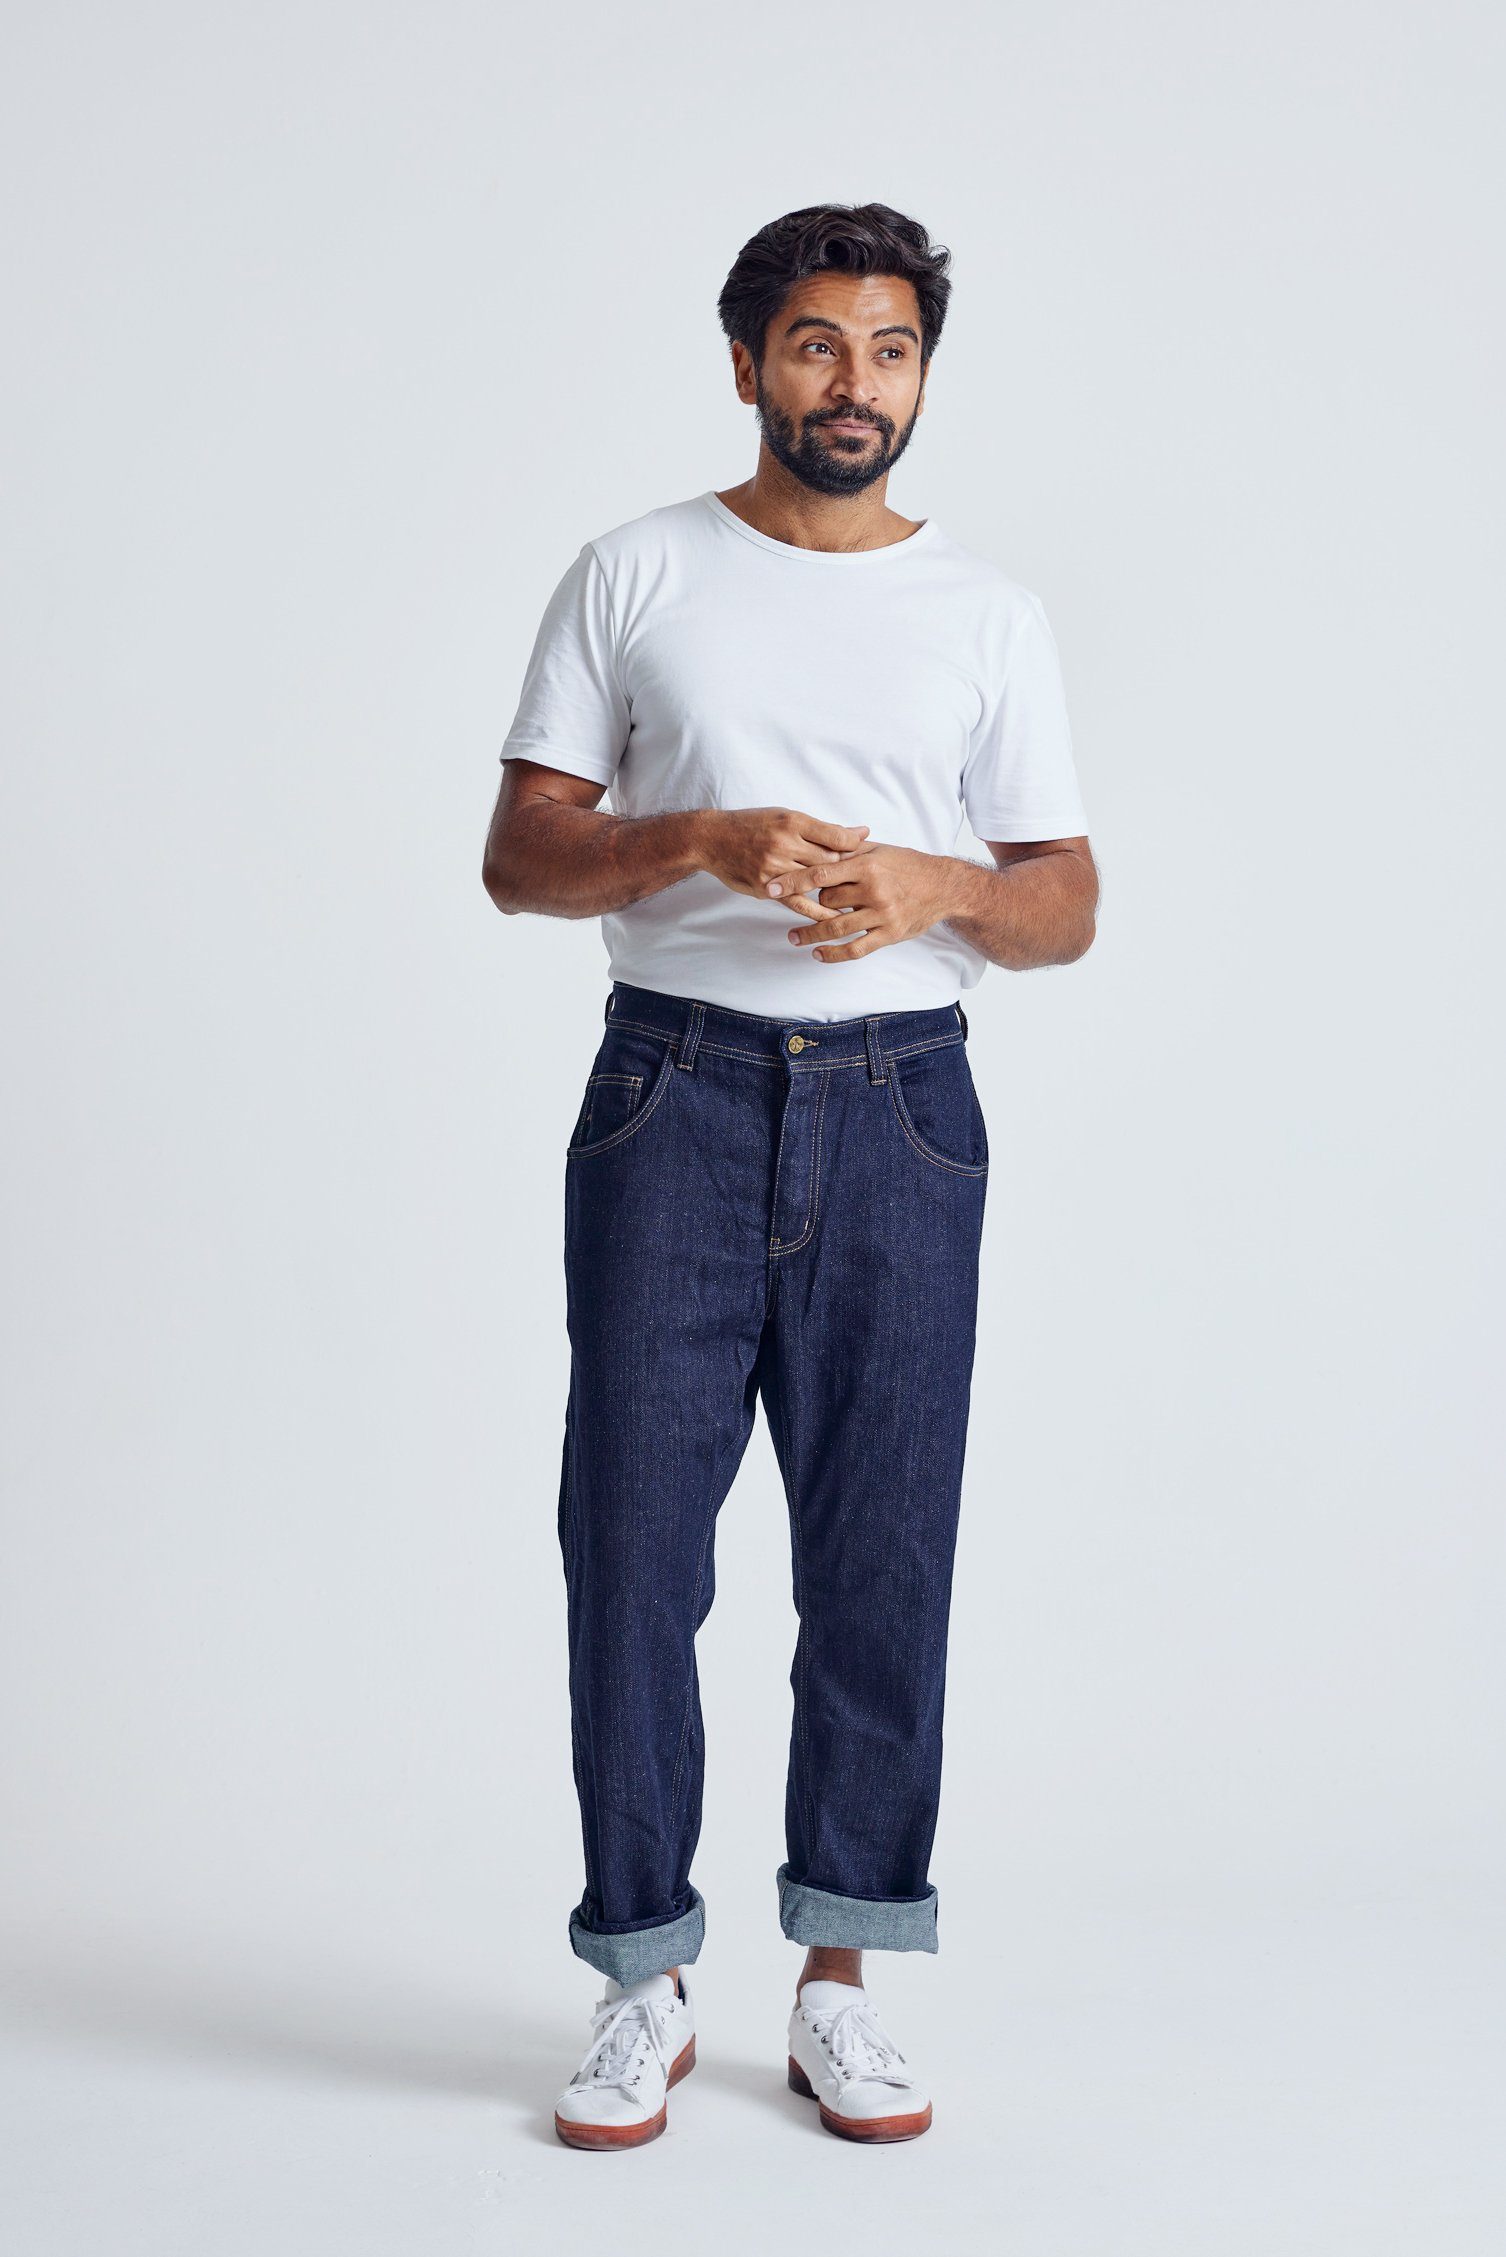 SATCH Rinse - GOTS Organic Cotton Jeans by Flax & Loom